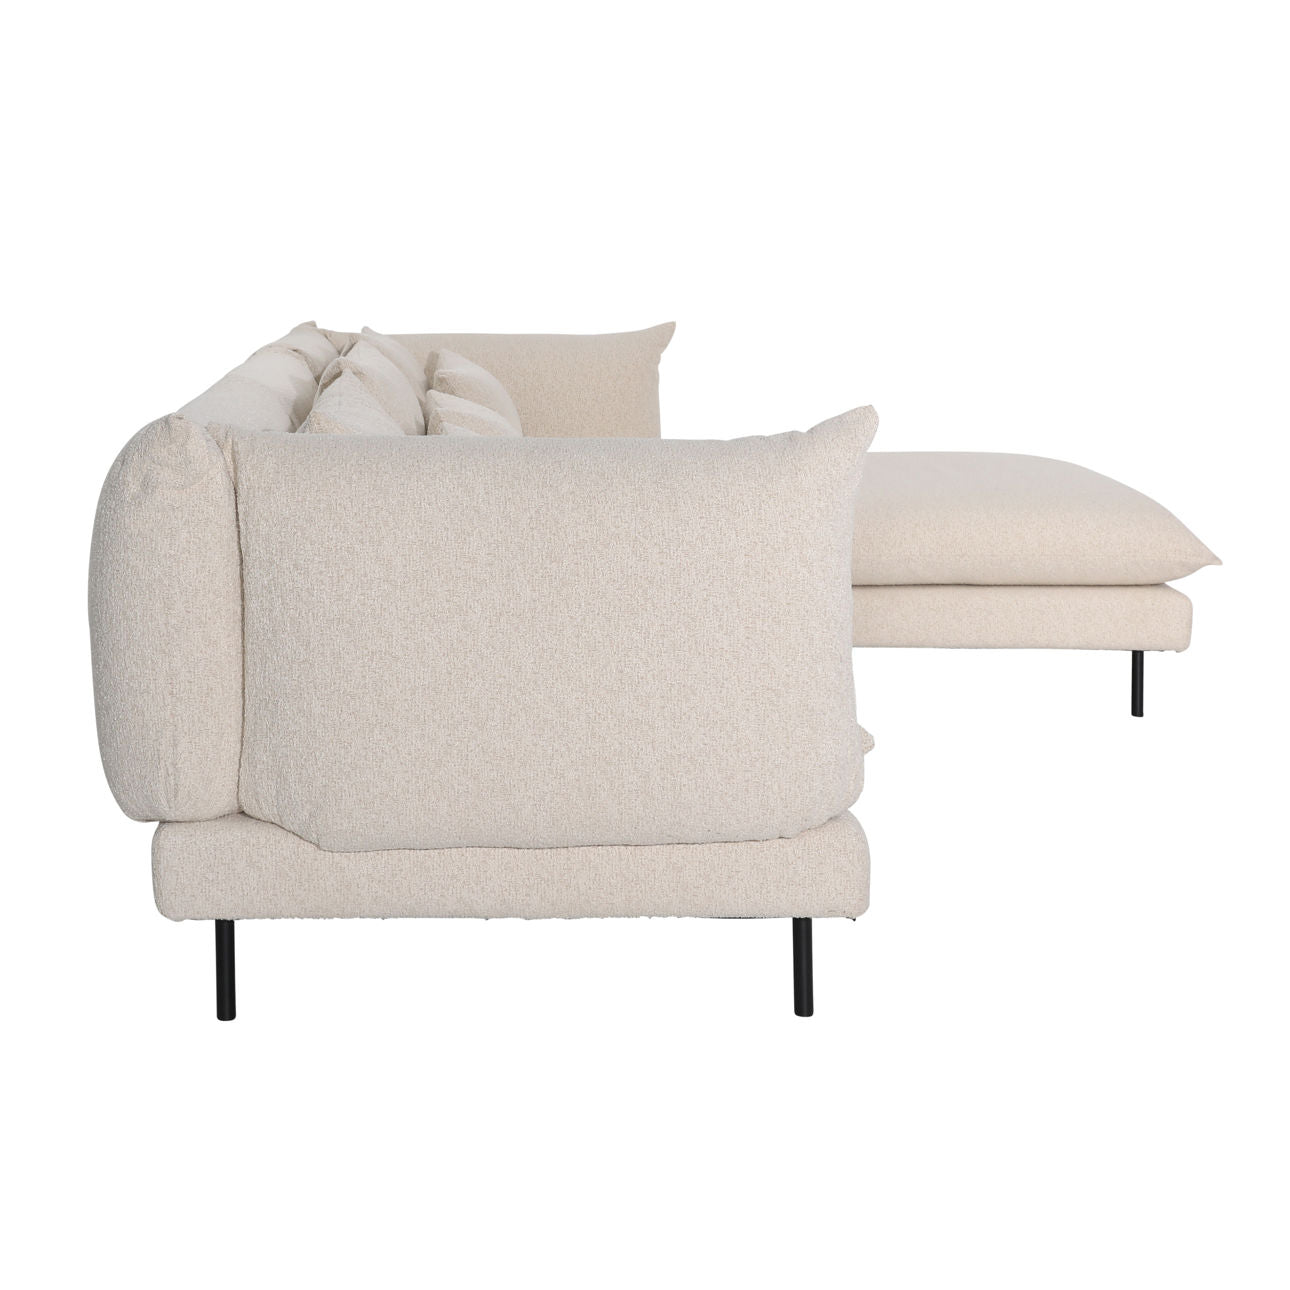 Twiggy Chaise Right Sectional